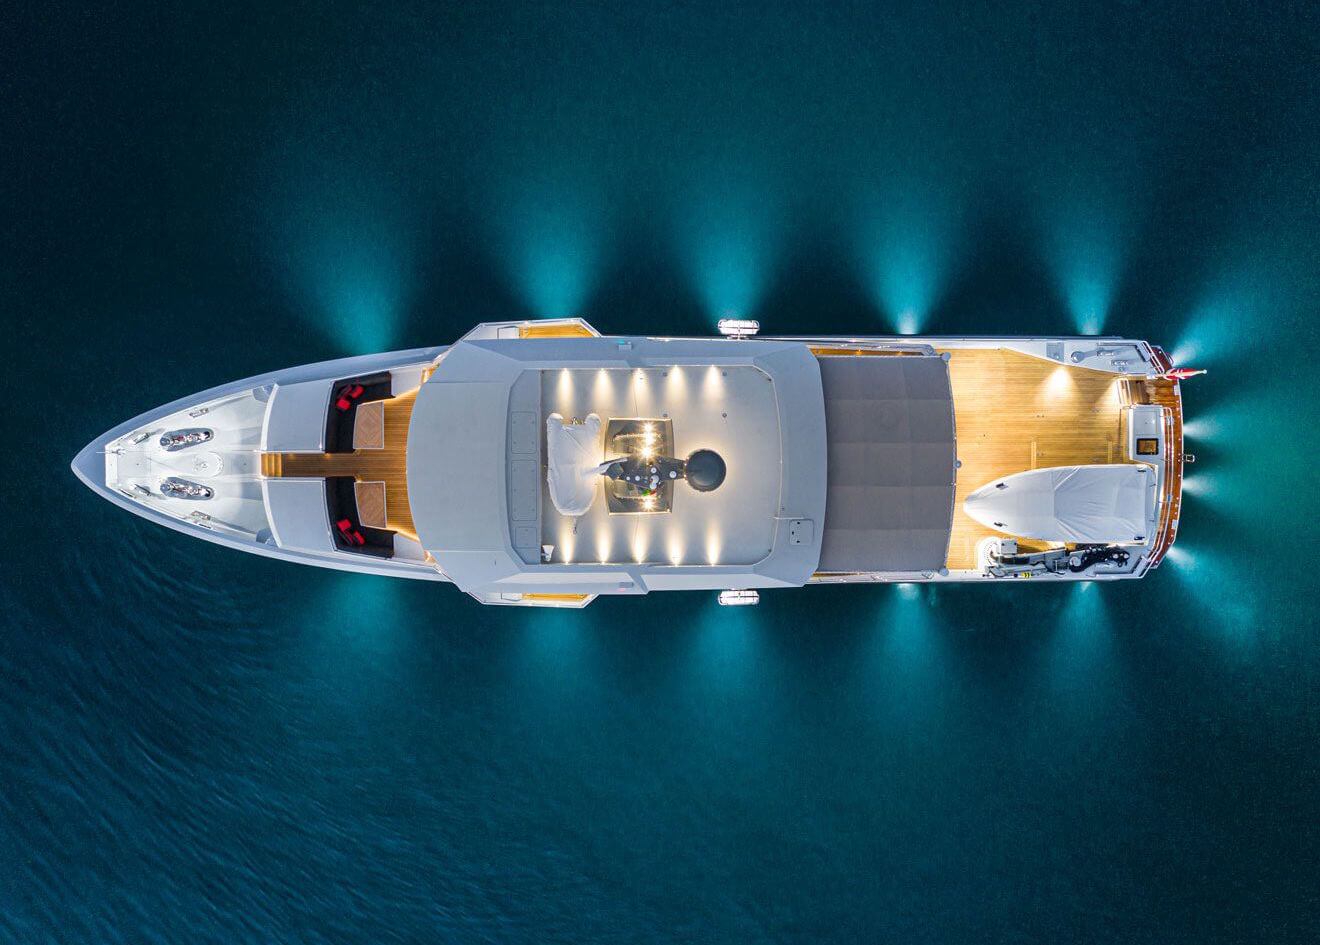 Evening arial shot of yacht in water with lighting